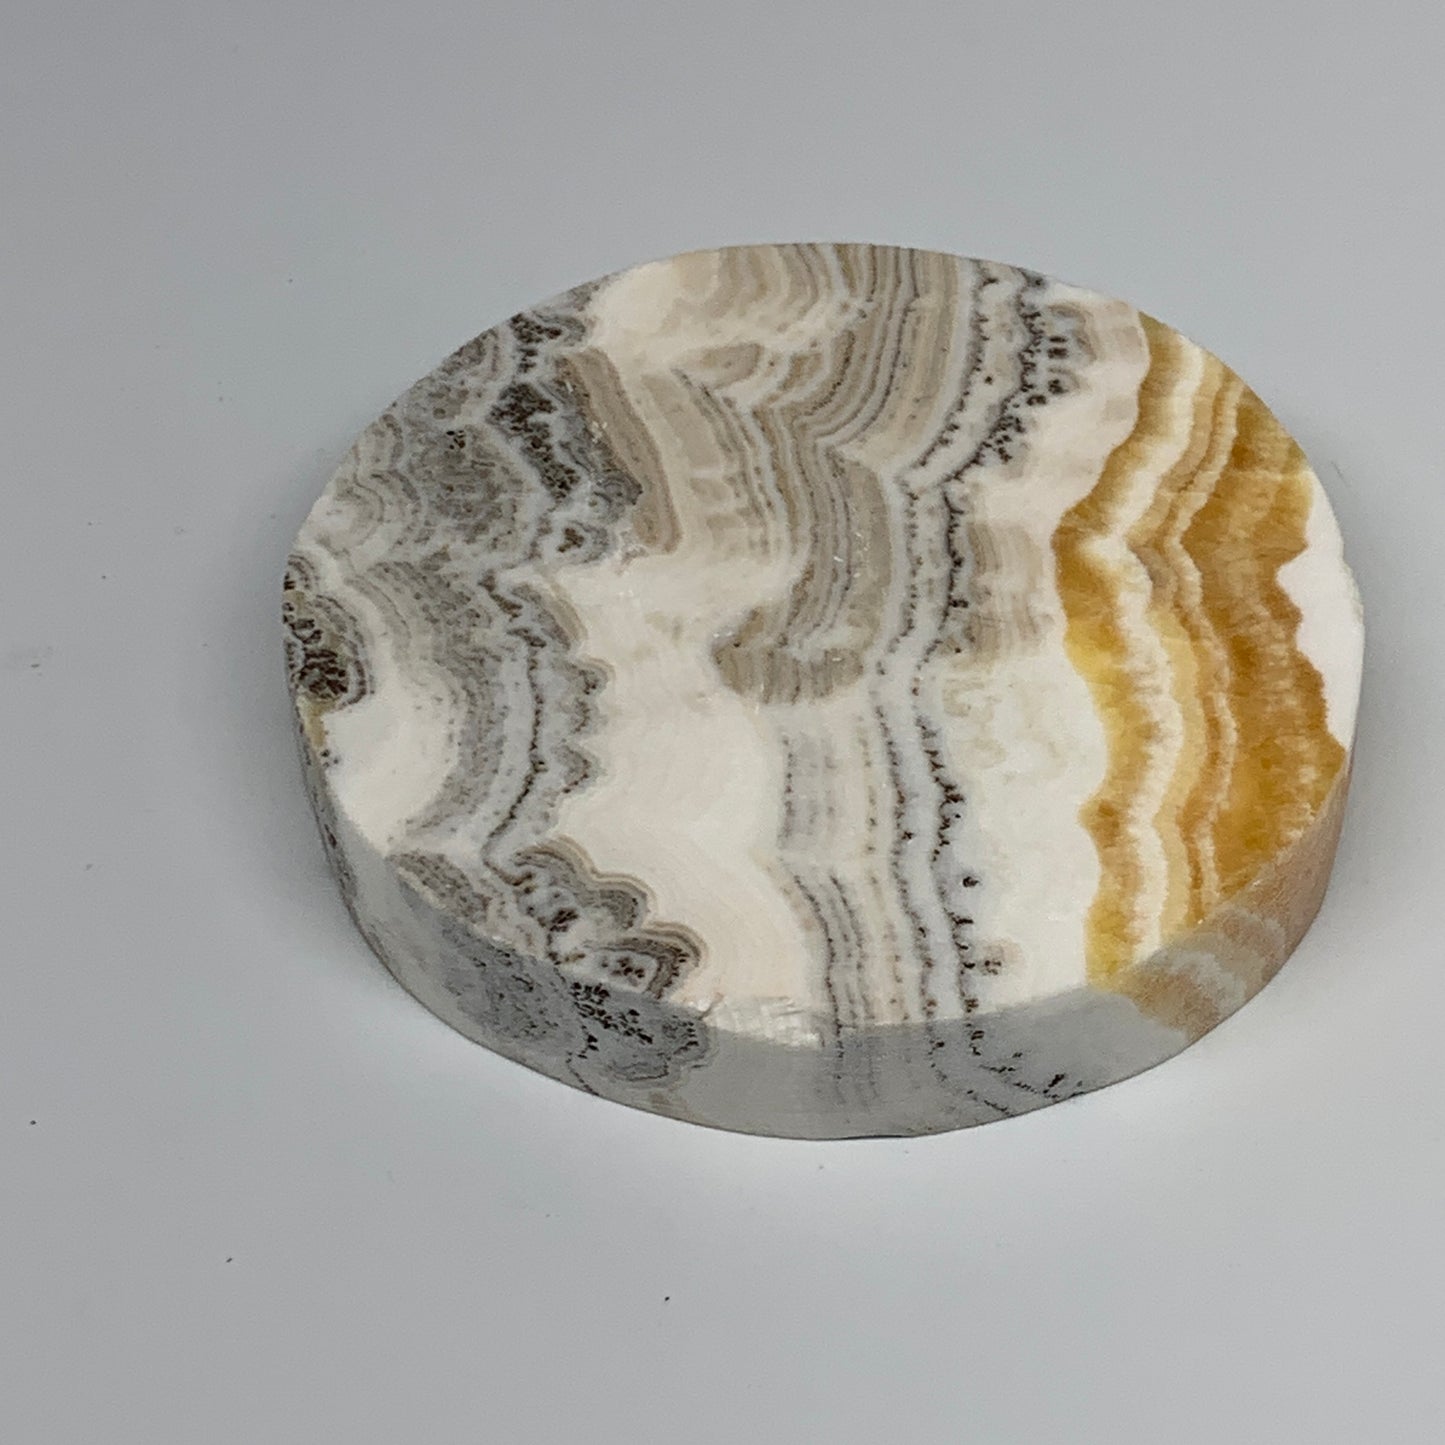 423.9g, 4.3"x0.8", Natural Picture Calcite Round Disc/Coaster @Mexico, B25479